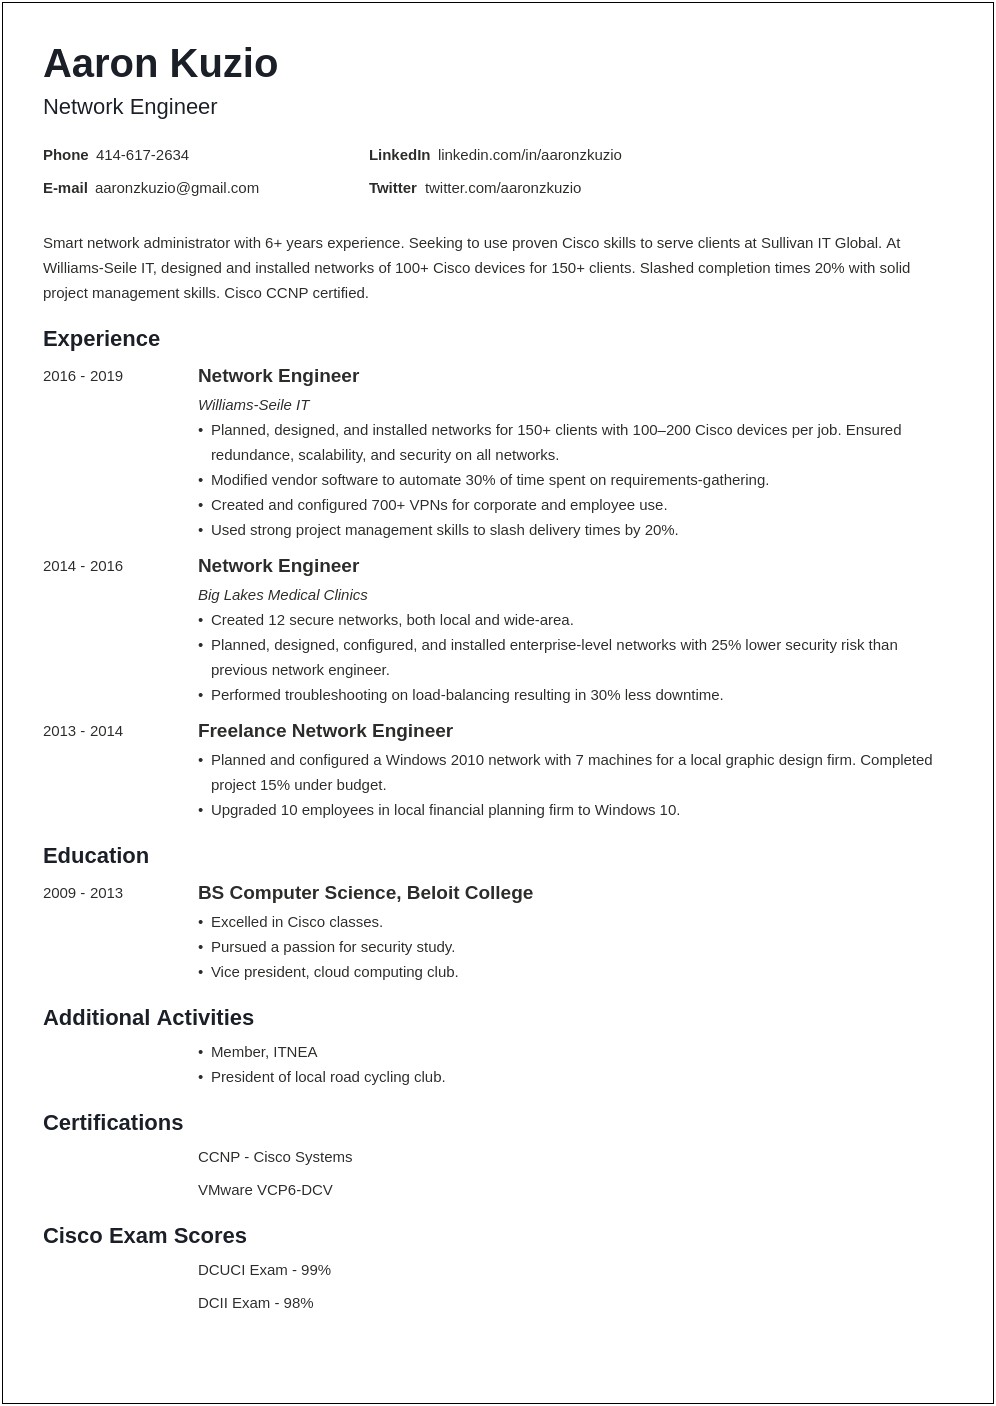 Cpr Certified Under Skills Or Qualifications On Resume